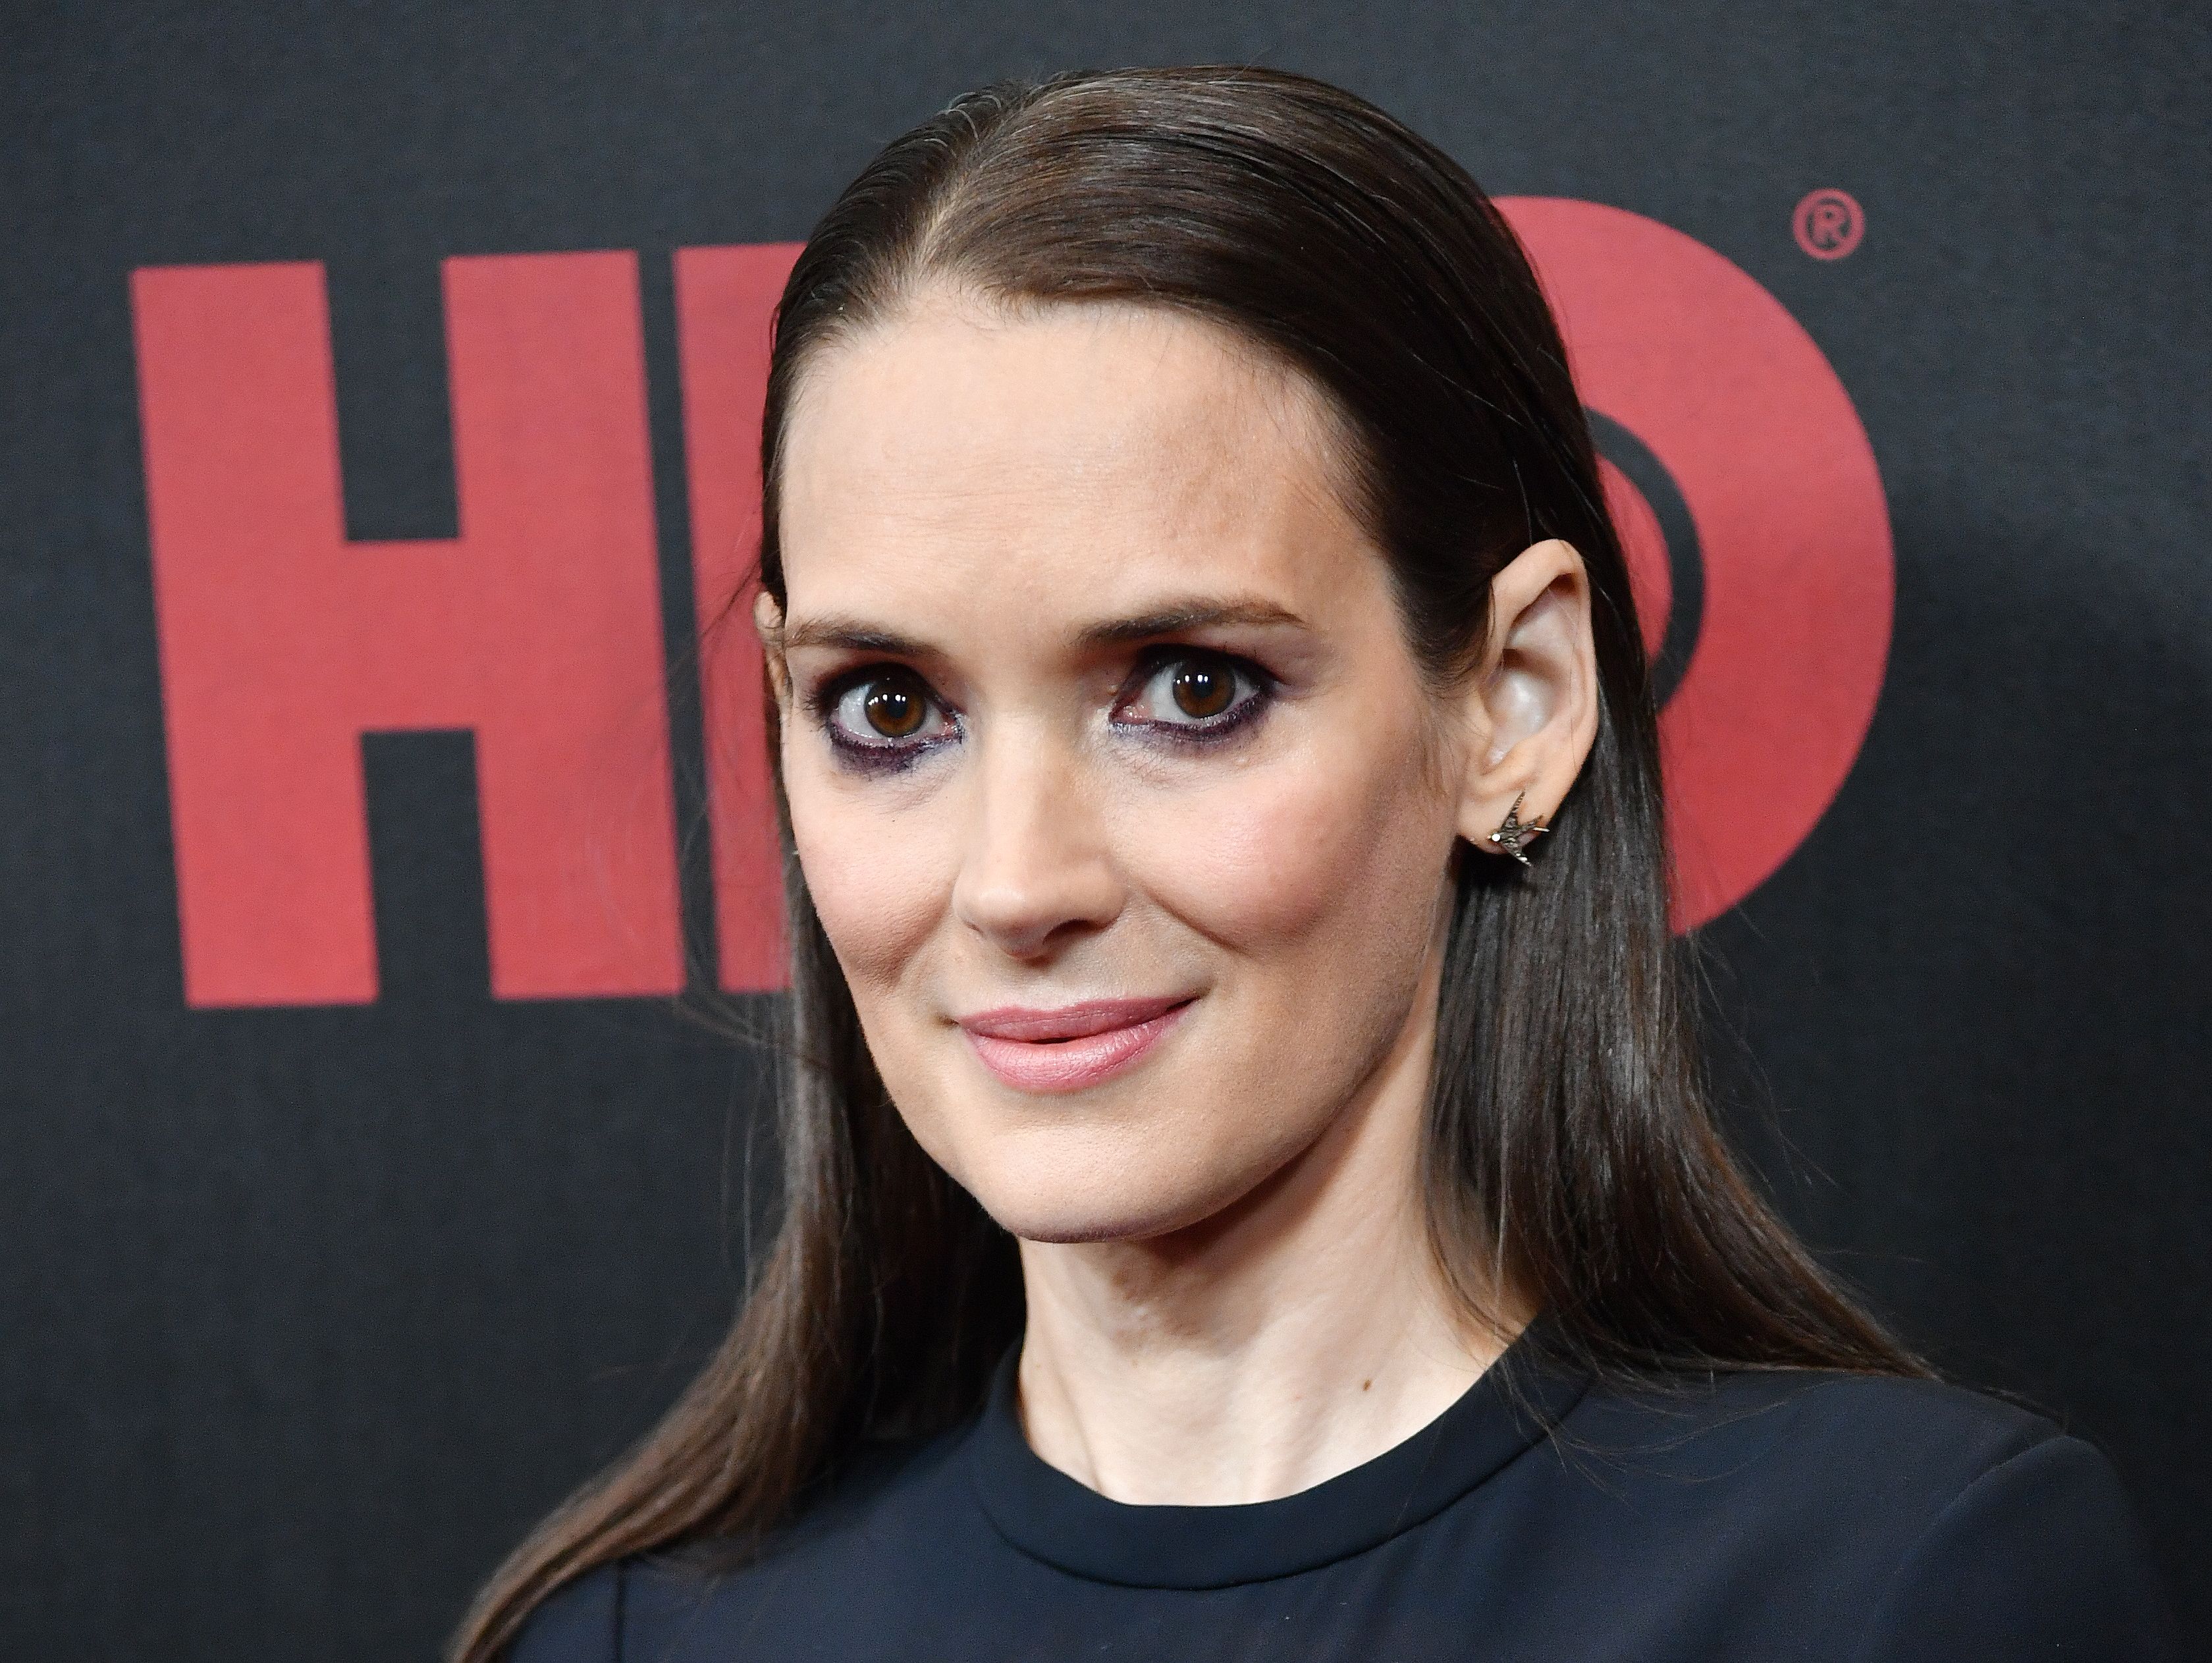 Fun Facts About Winona Ryder Where She's From and More